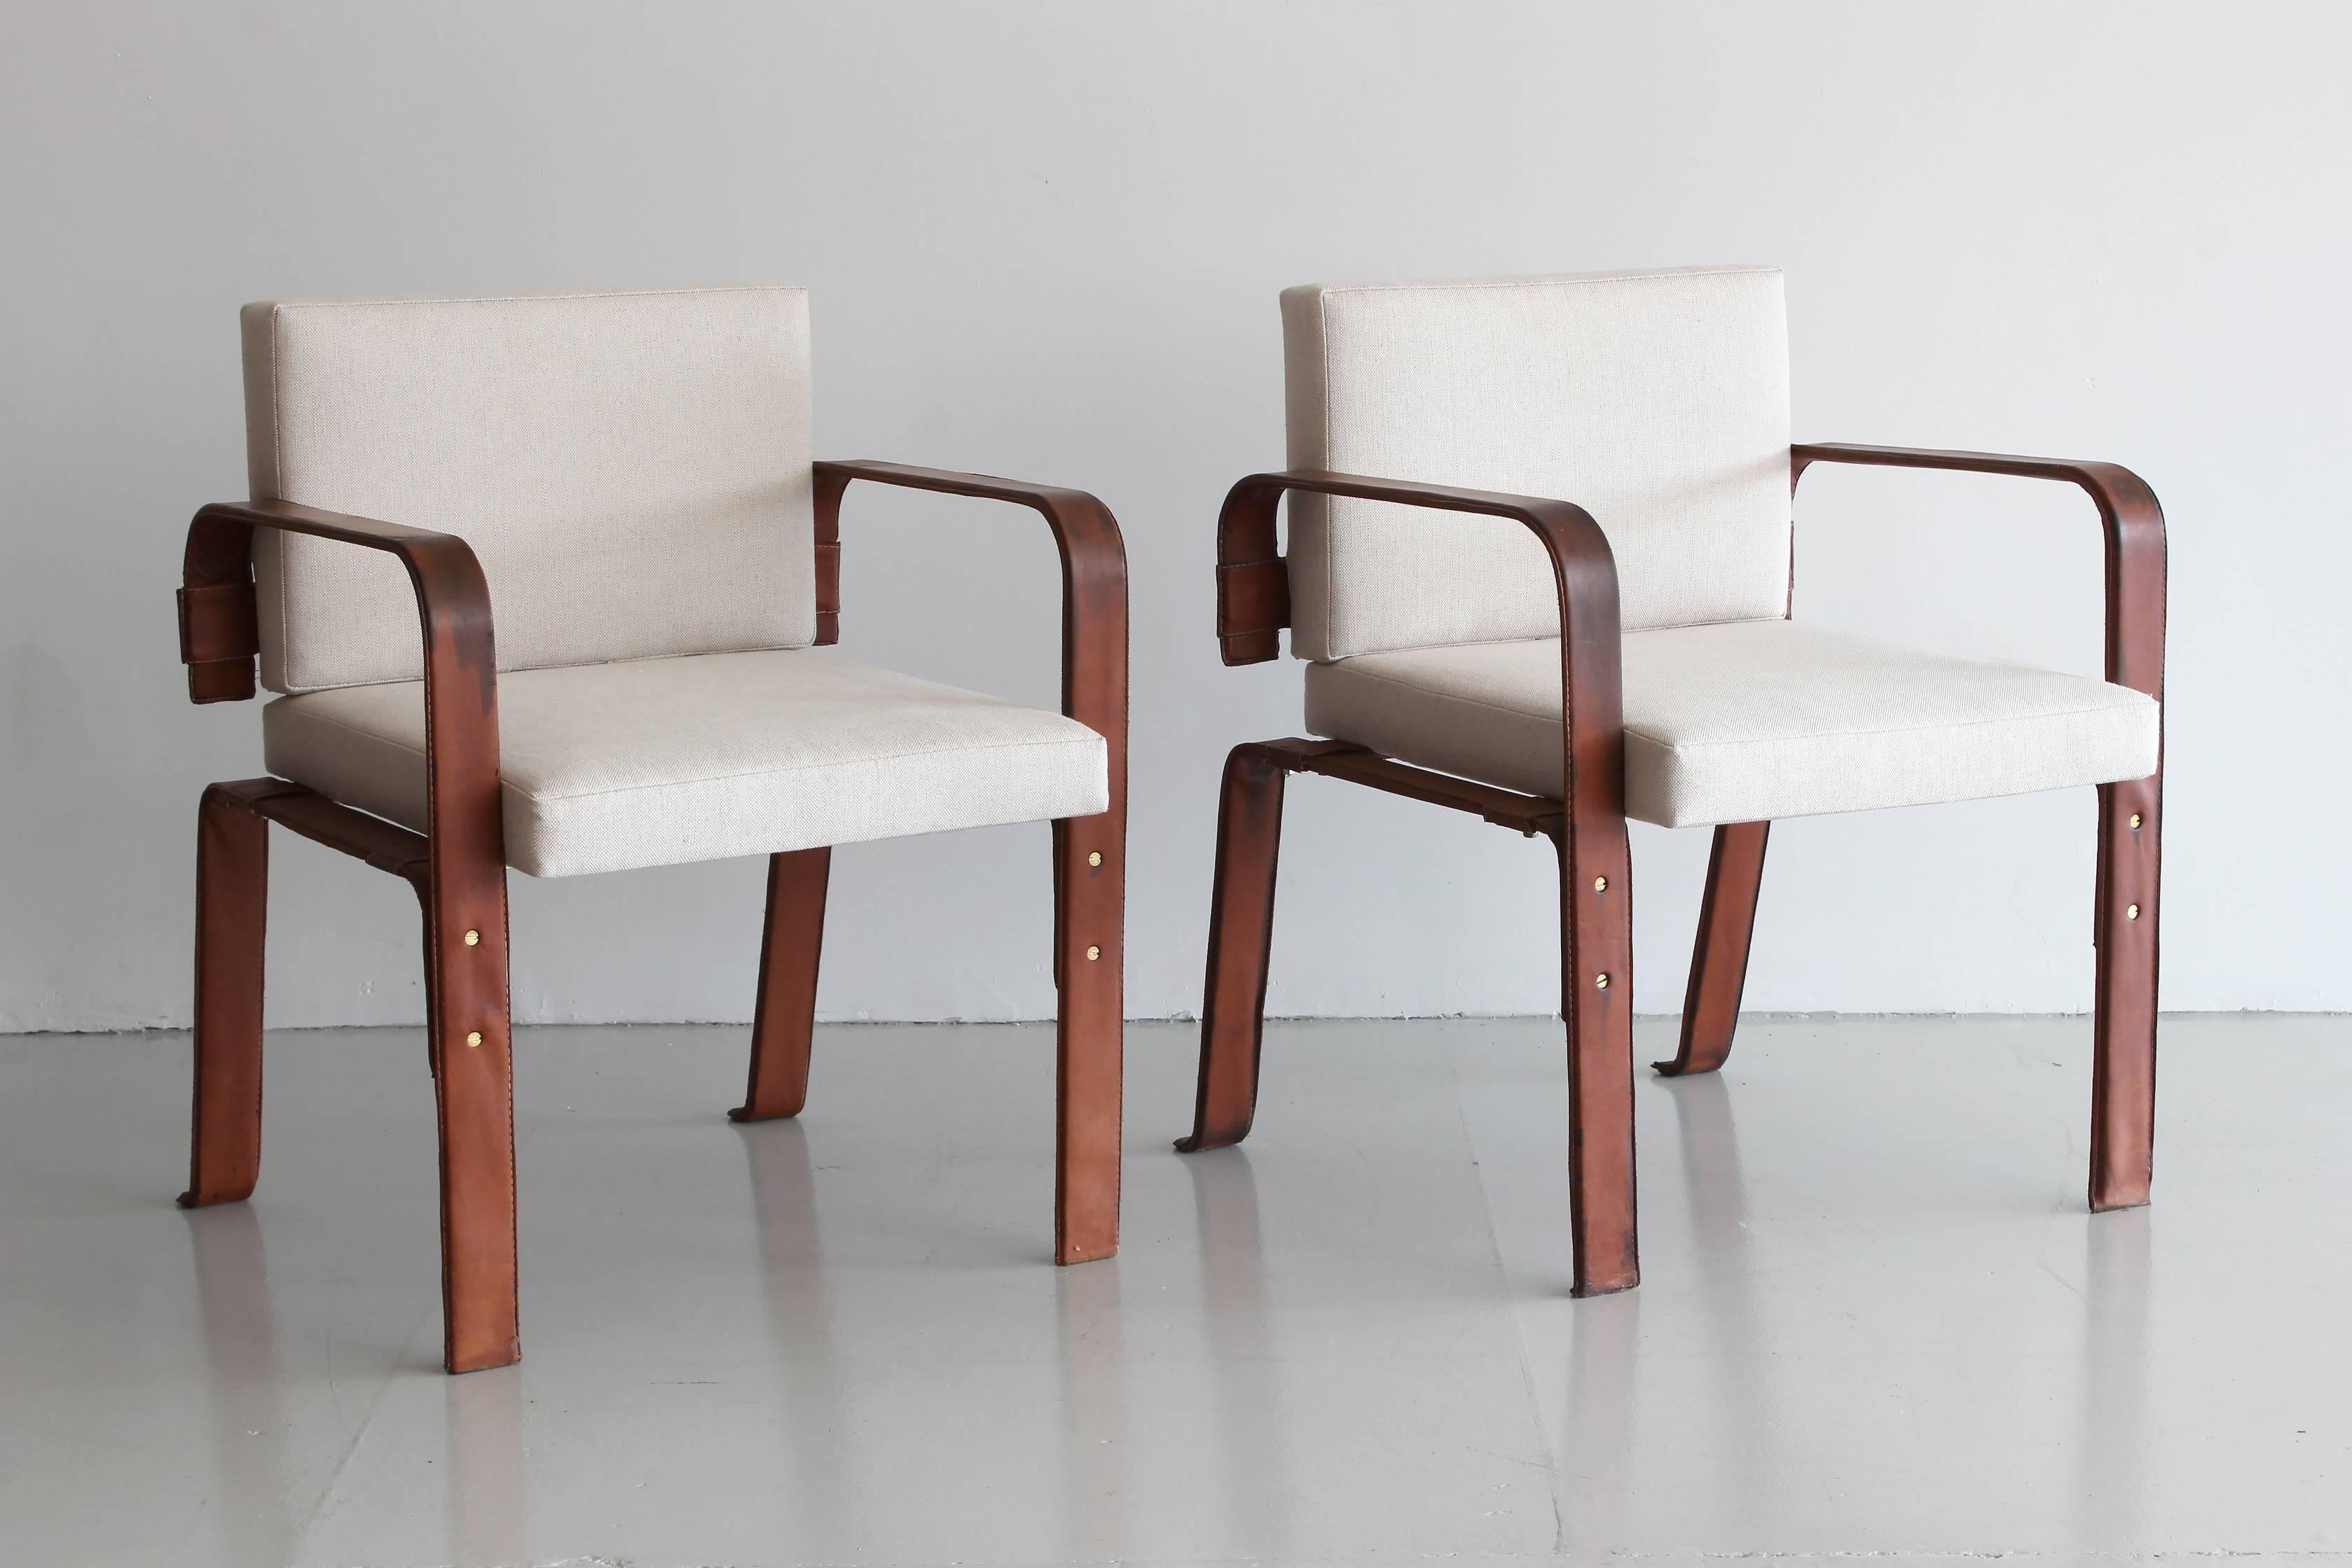 Pair of accent chairs in heavy gauge bent metal wrapped in leather with perfect distress and patina. Newly reupholstered in Classic linen. Superb quality and details with exposed screws and beautiful saddle leather.